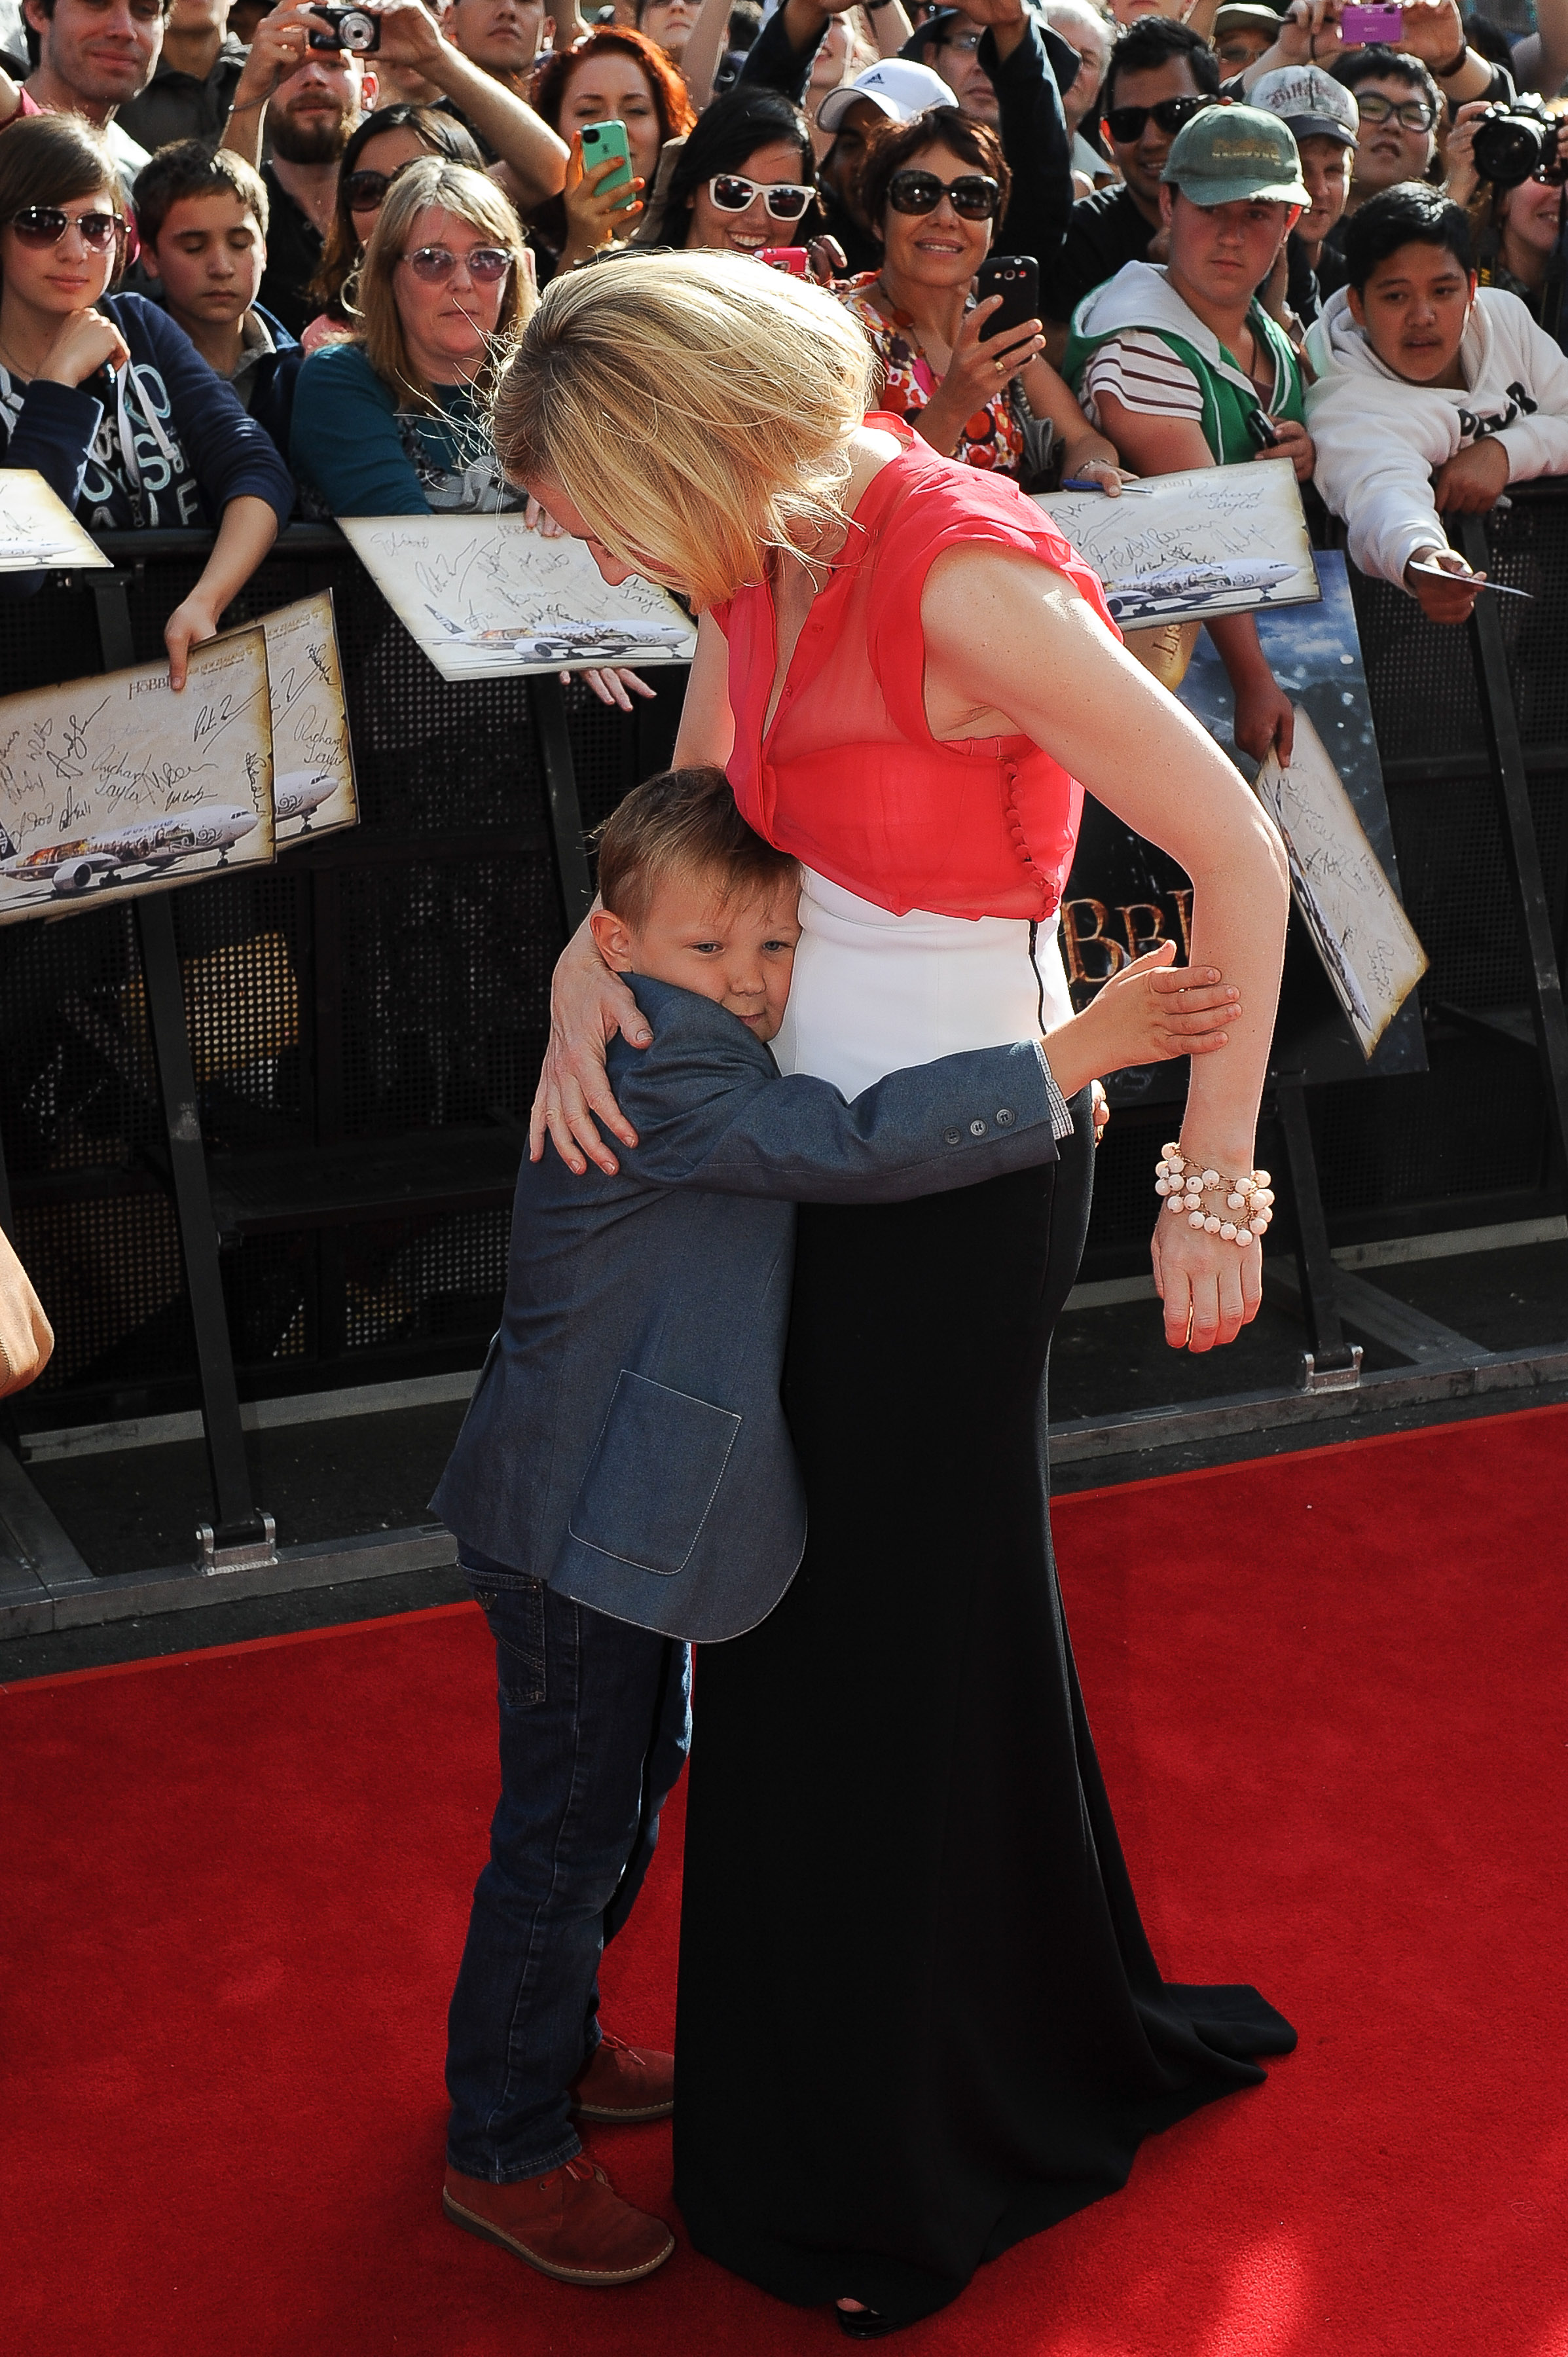 Cate Blanchett and her son at the "The Hobbit: An Unexpected Journey" world premiere on November 28, 2012, in Wellington, New Zealand | Source: Getty Images